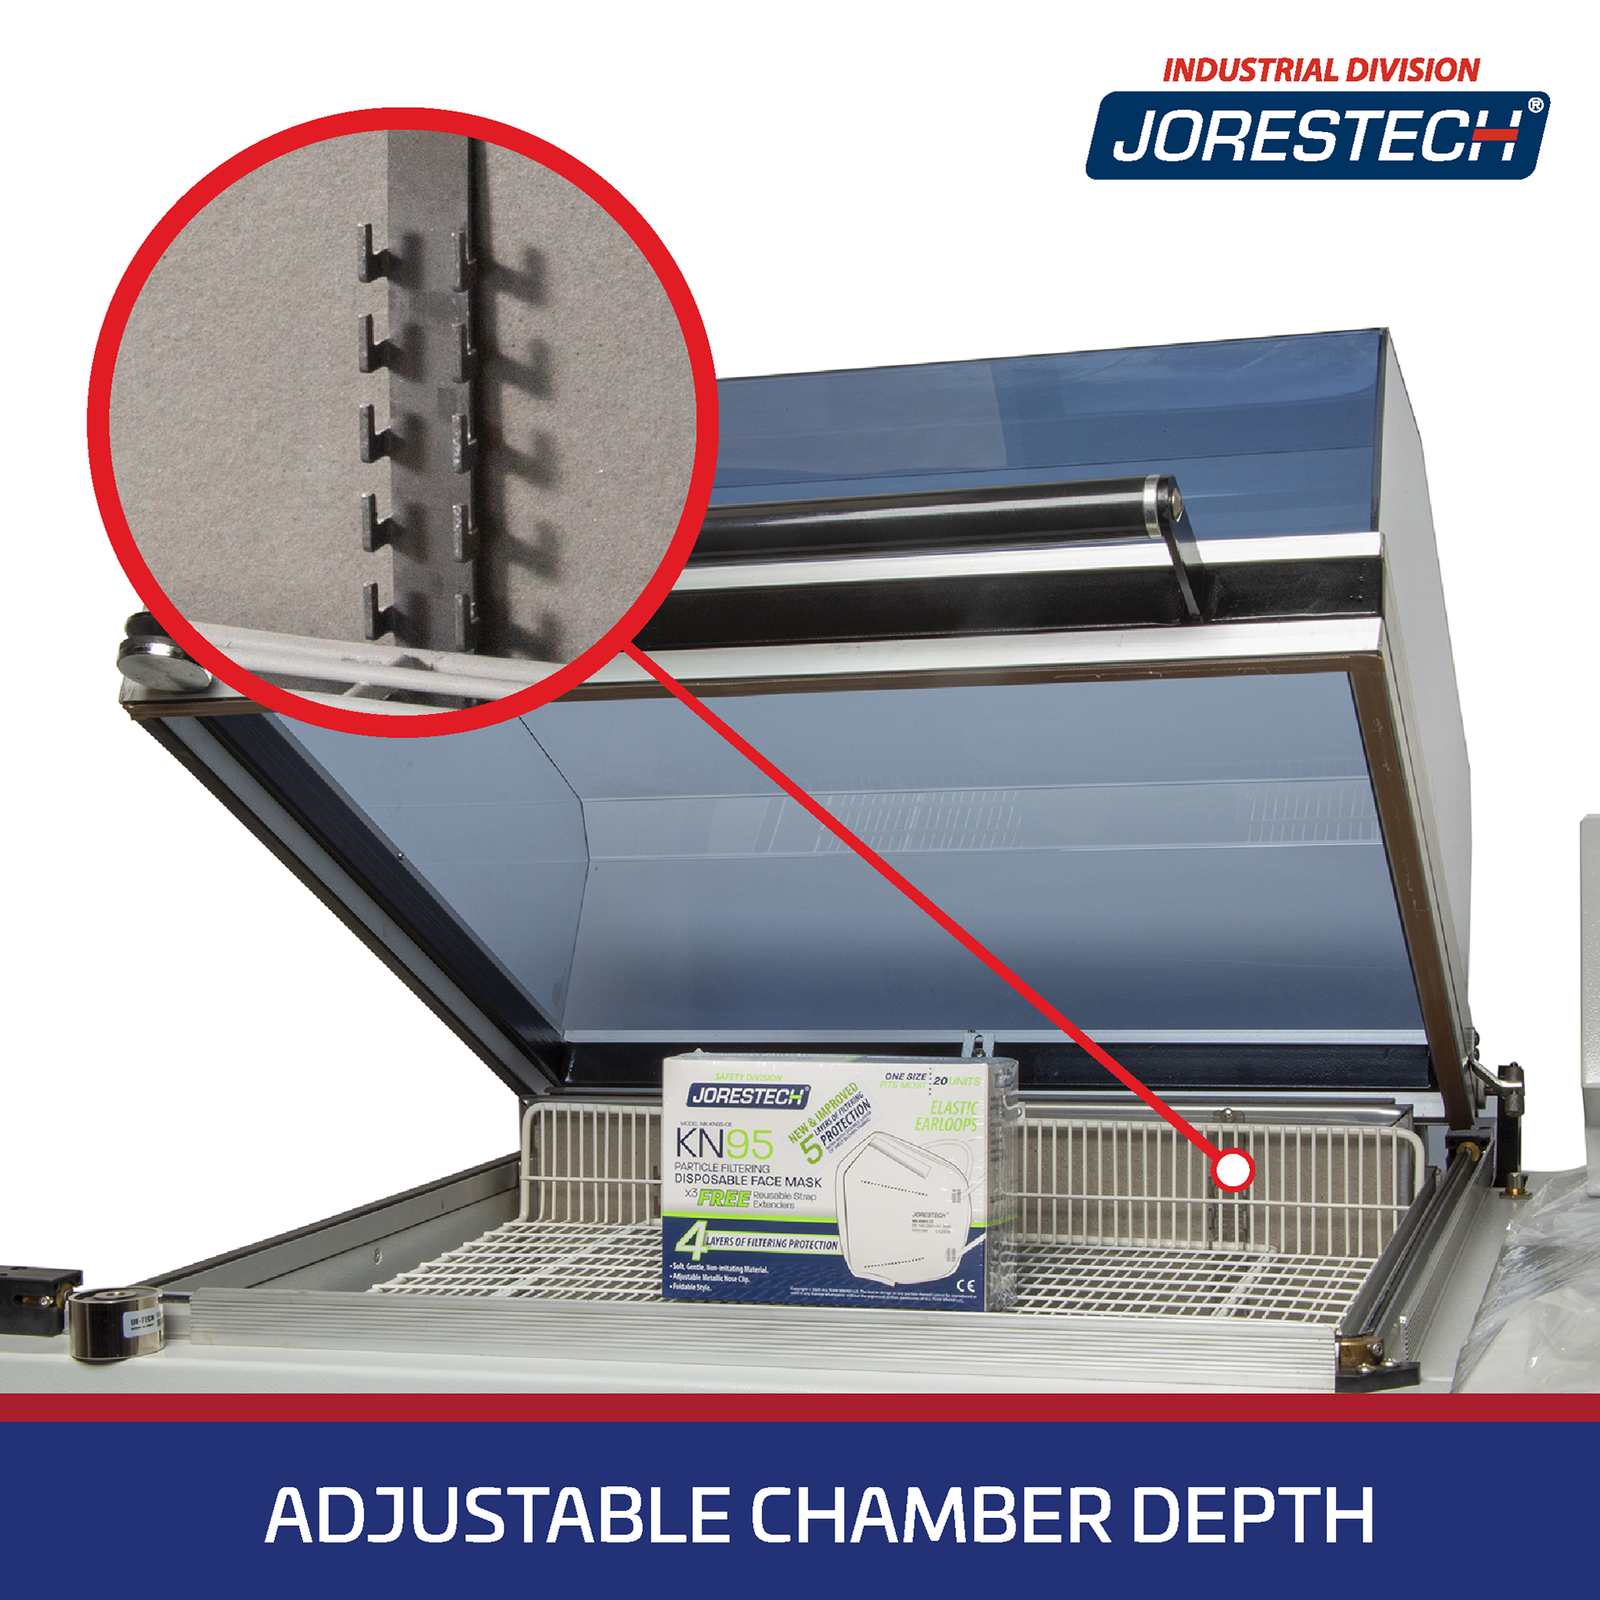 Close up of the shrink chamber of a JORES TECHNOLOGIES® shrink wrapping system with a boxes that was shrink packaged. A zoomed in shows the height adjustment racks behind the chamber tray where chamber depth can be adjusted. Blue banner text says: Adjustable Chamber Depth.